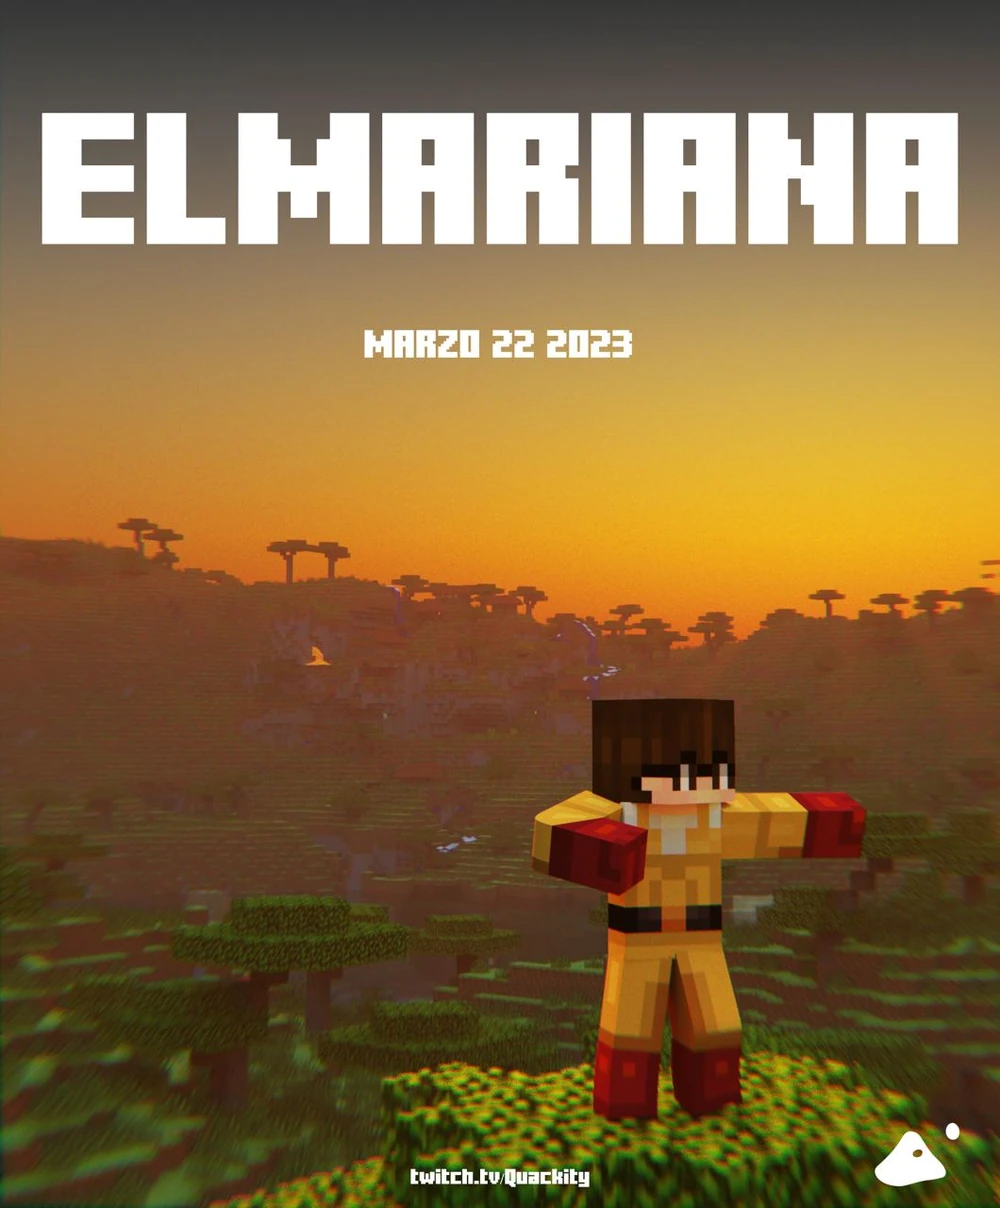 Official announcement poster for Mariana. He stands on top of a tree in an oak forest at the bottom of a basin. The sun sets in the background. Mariana looks like he's practicing some kind of martial arts, with one arm extended and one arm pulled back.